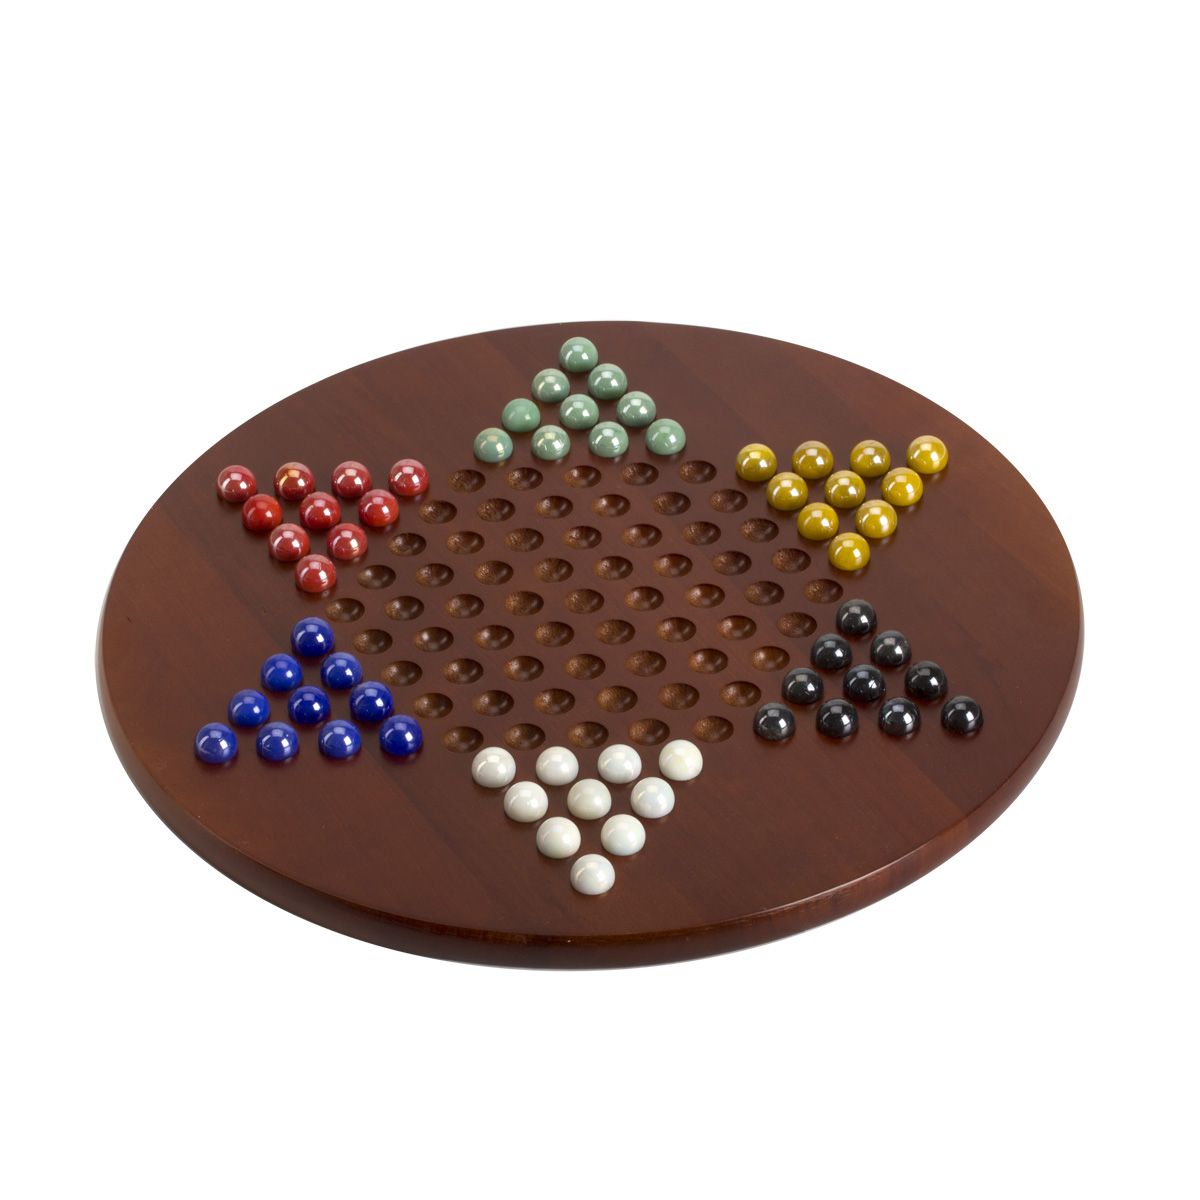 15" Jumbo Chinese Checkers W/ Marbles